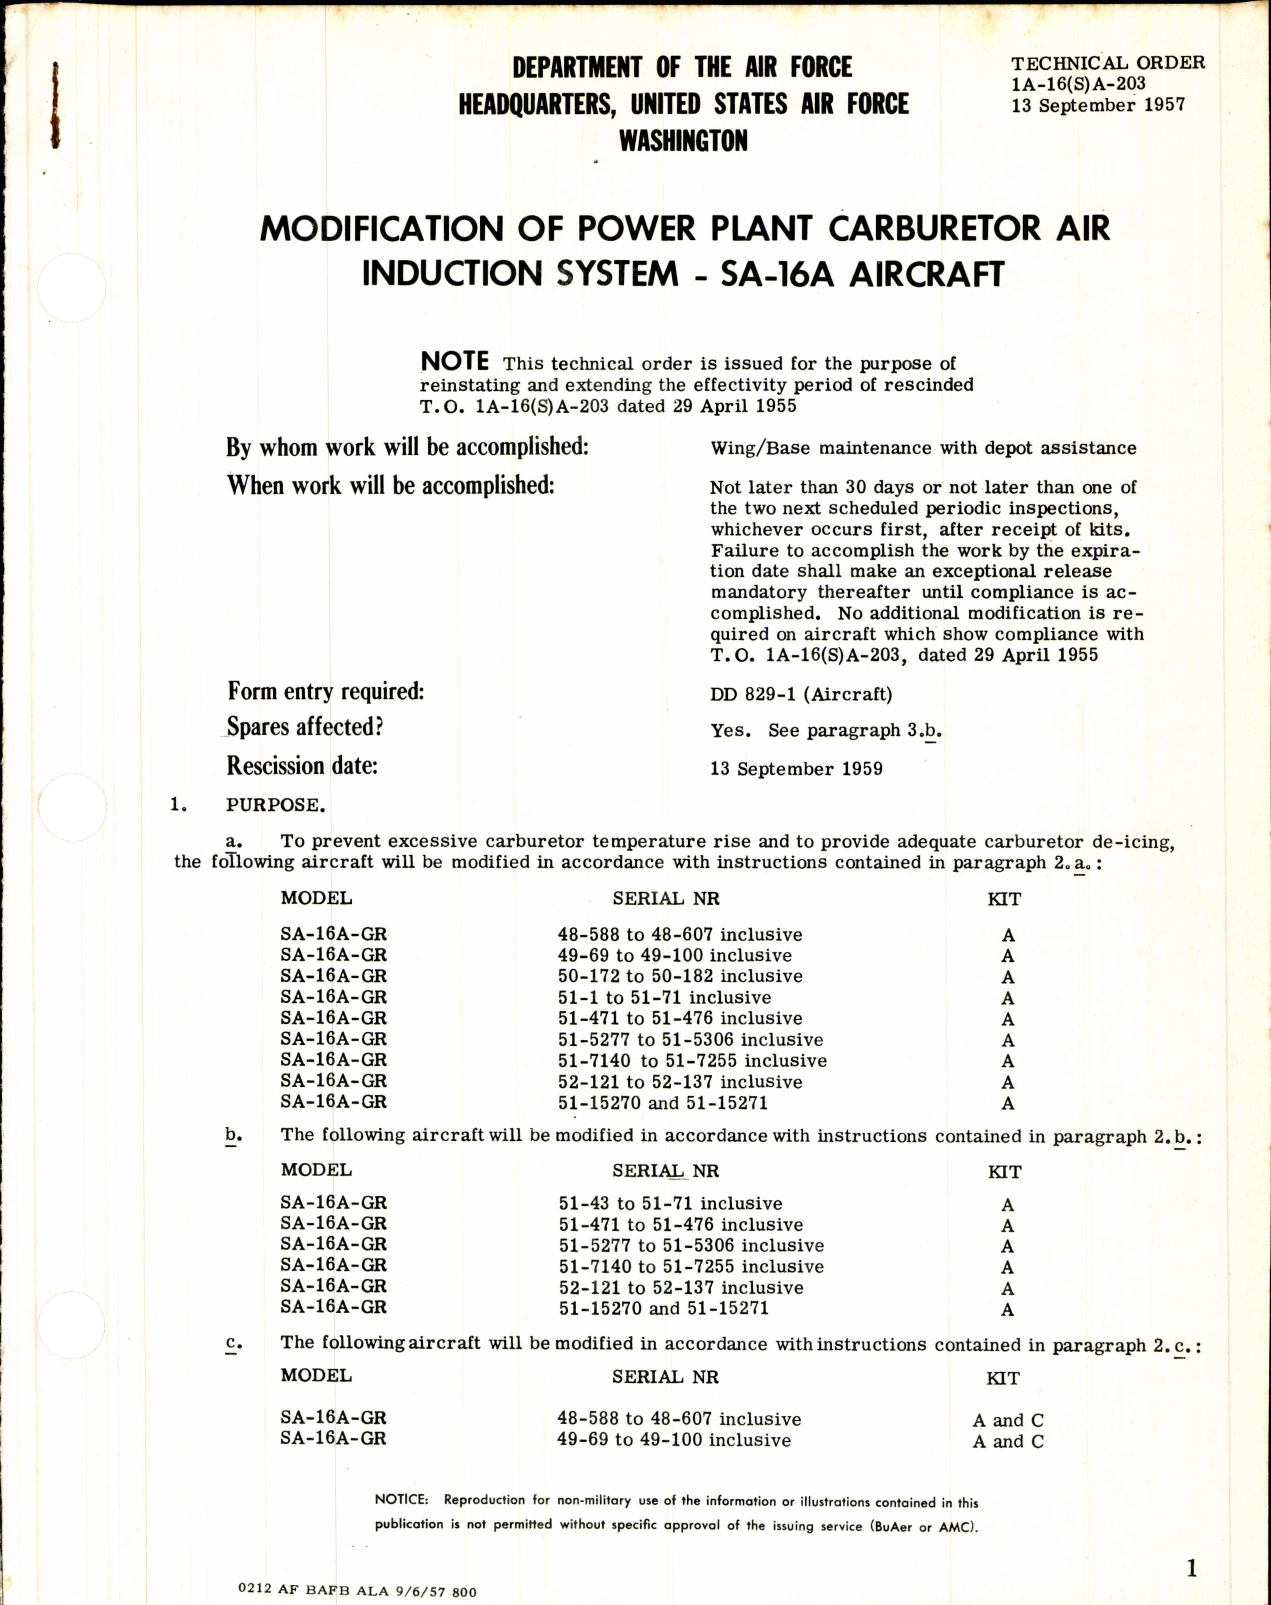 Sample page 1 from AirCorps Library document: Modification of Power Plant Carburetor Air Induction System for SA-16A Aircraft